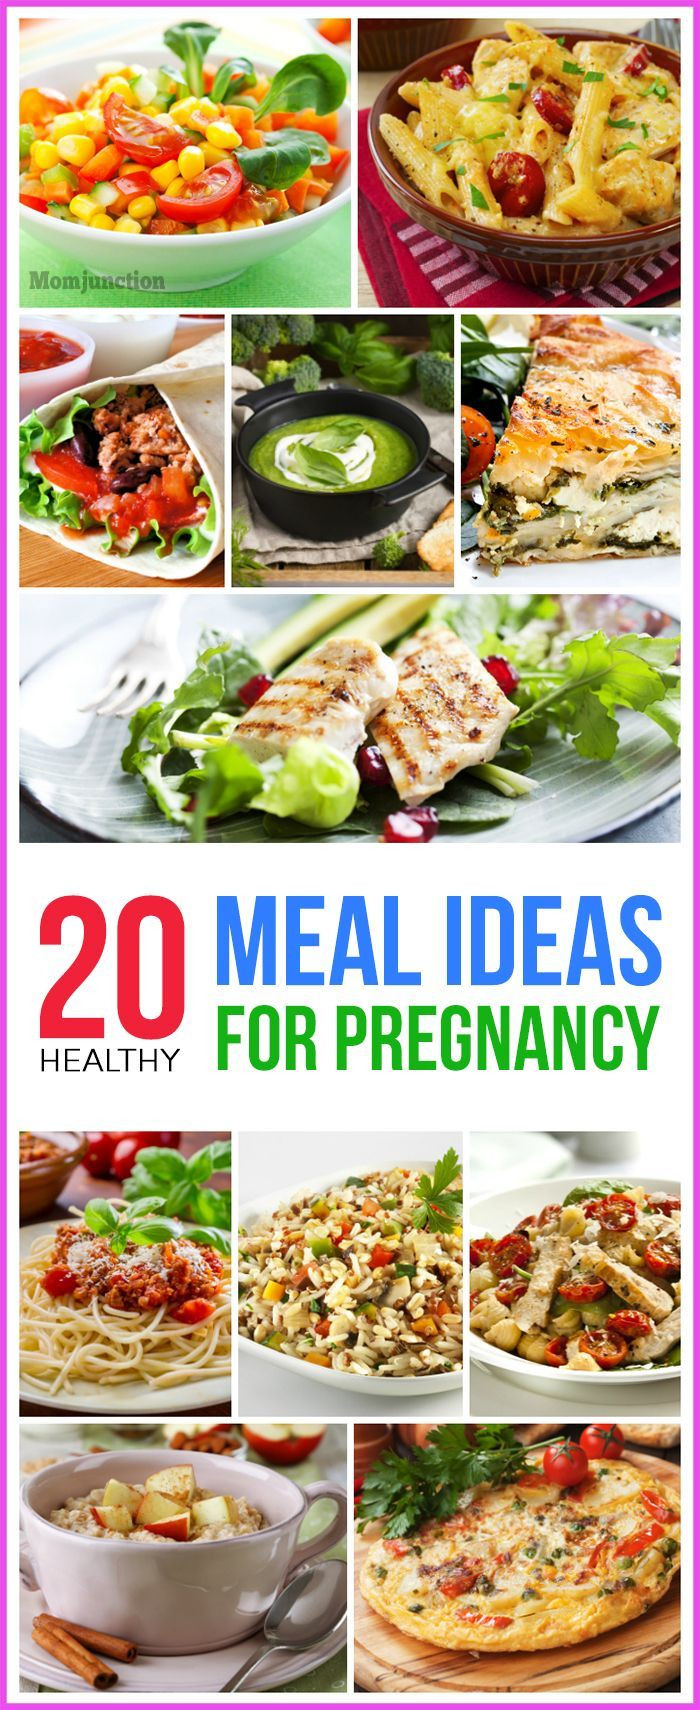 Healthy Pregnancy Lunches
 25 best Pregnancy Lunches ideas on Pinterest